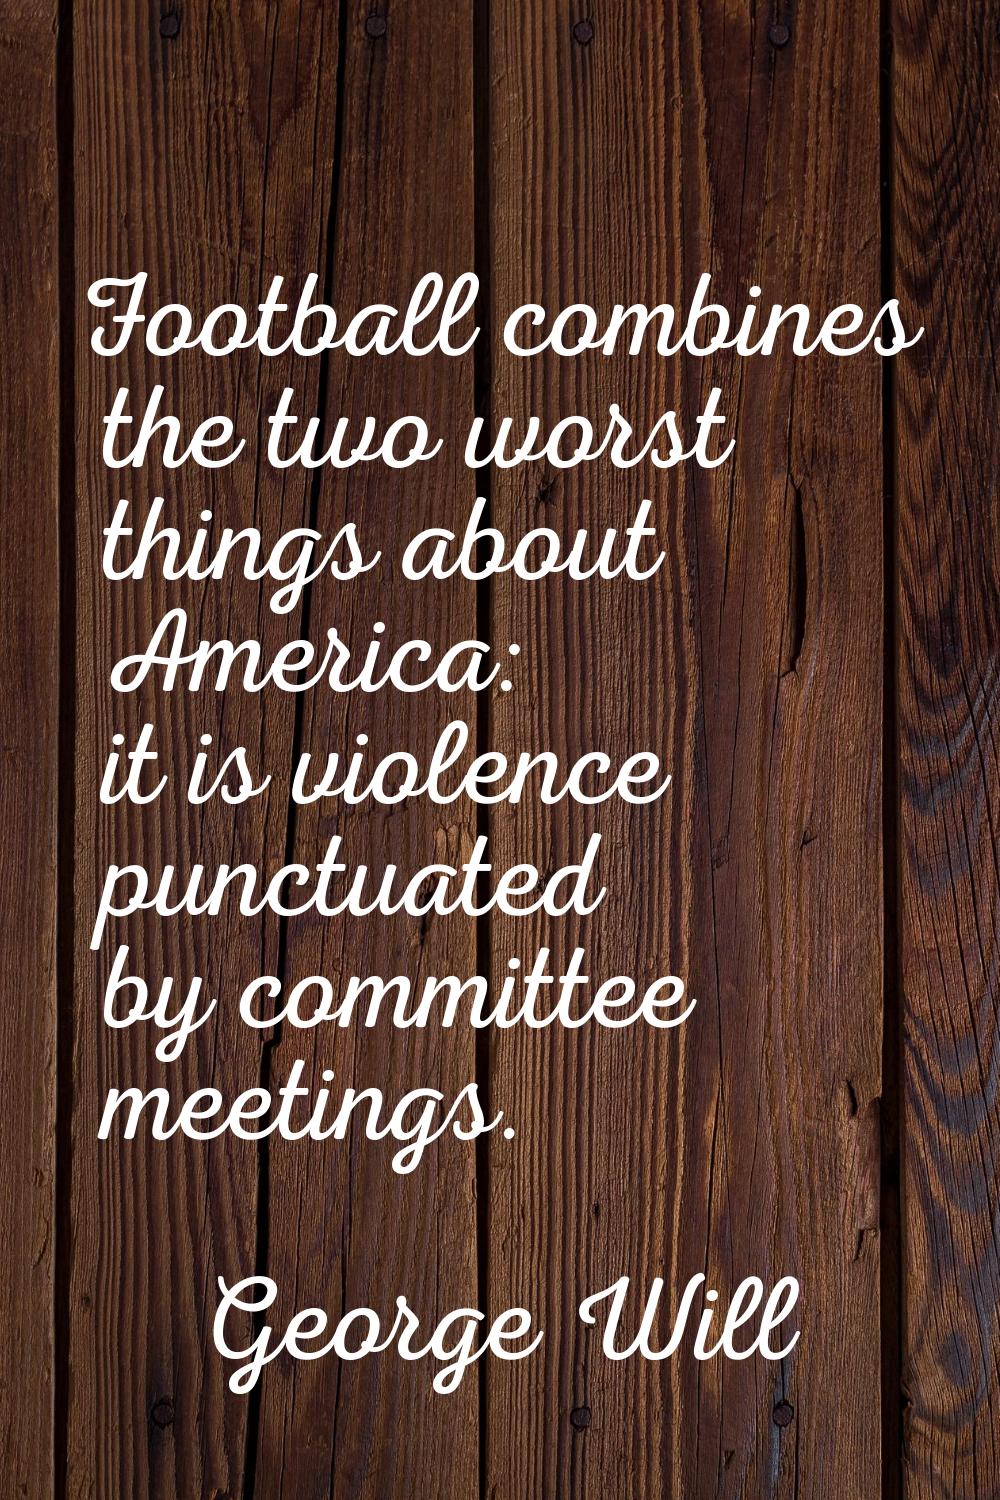 Football combines the two worst things about America: it is violence punctuated by committee meetin